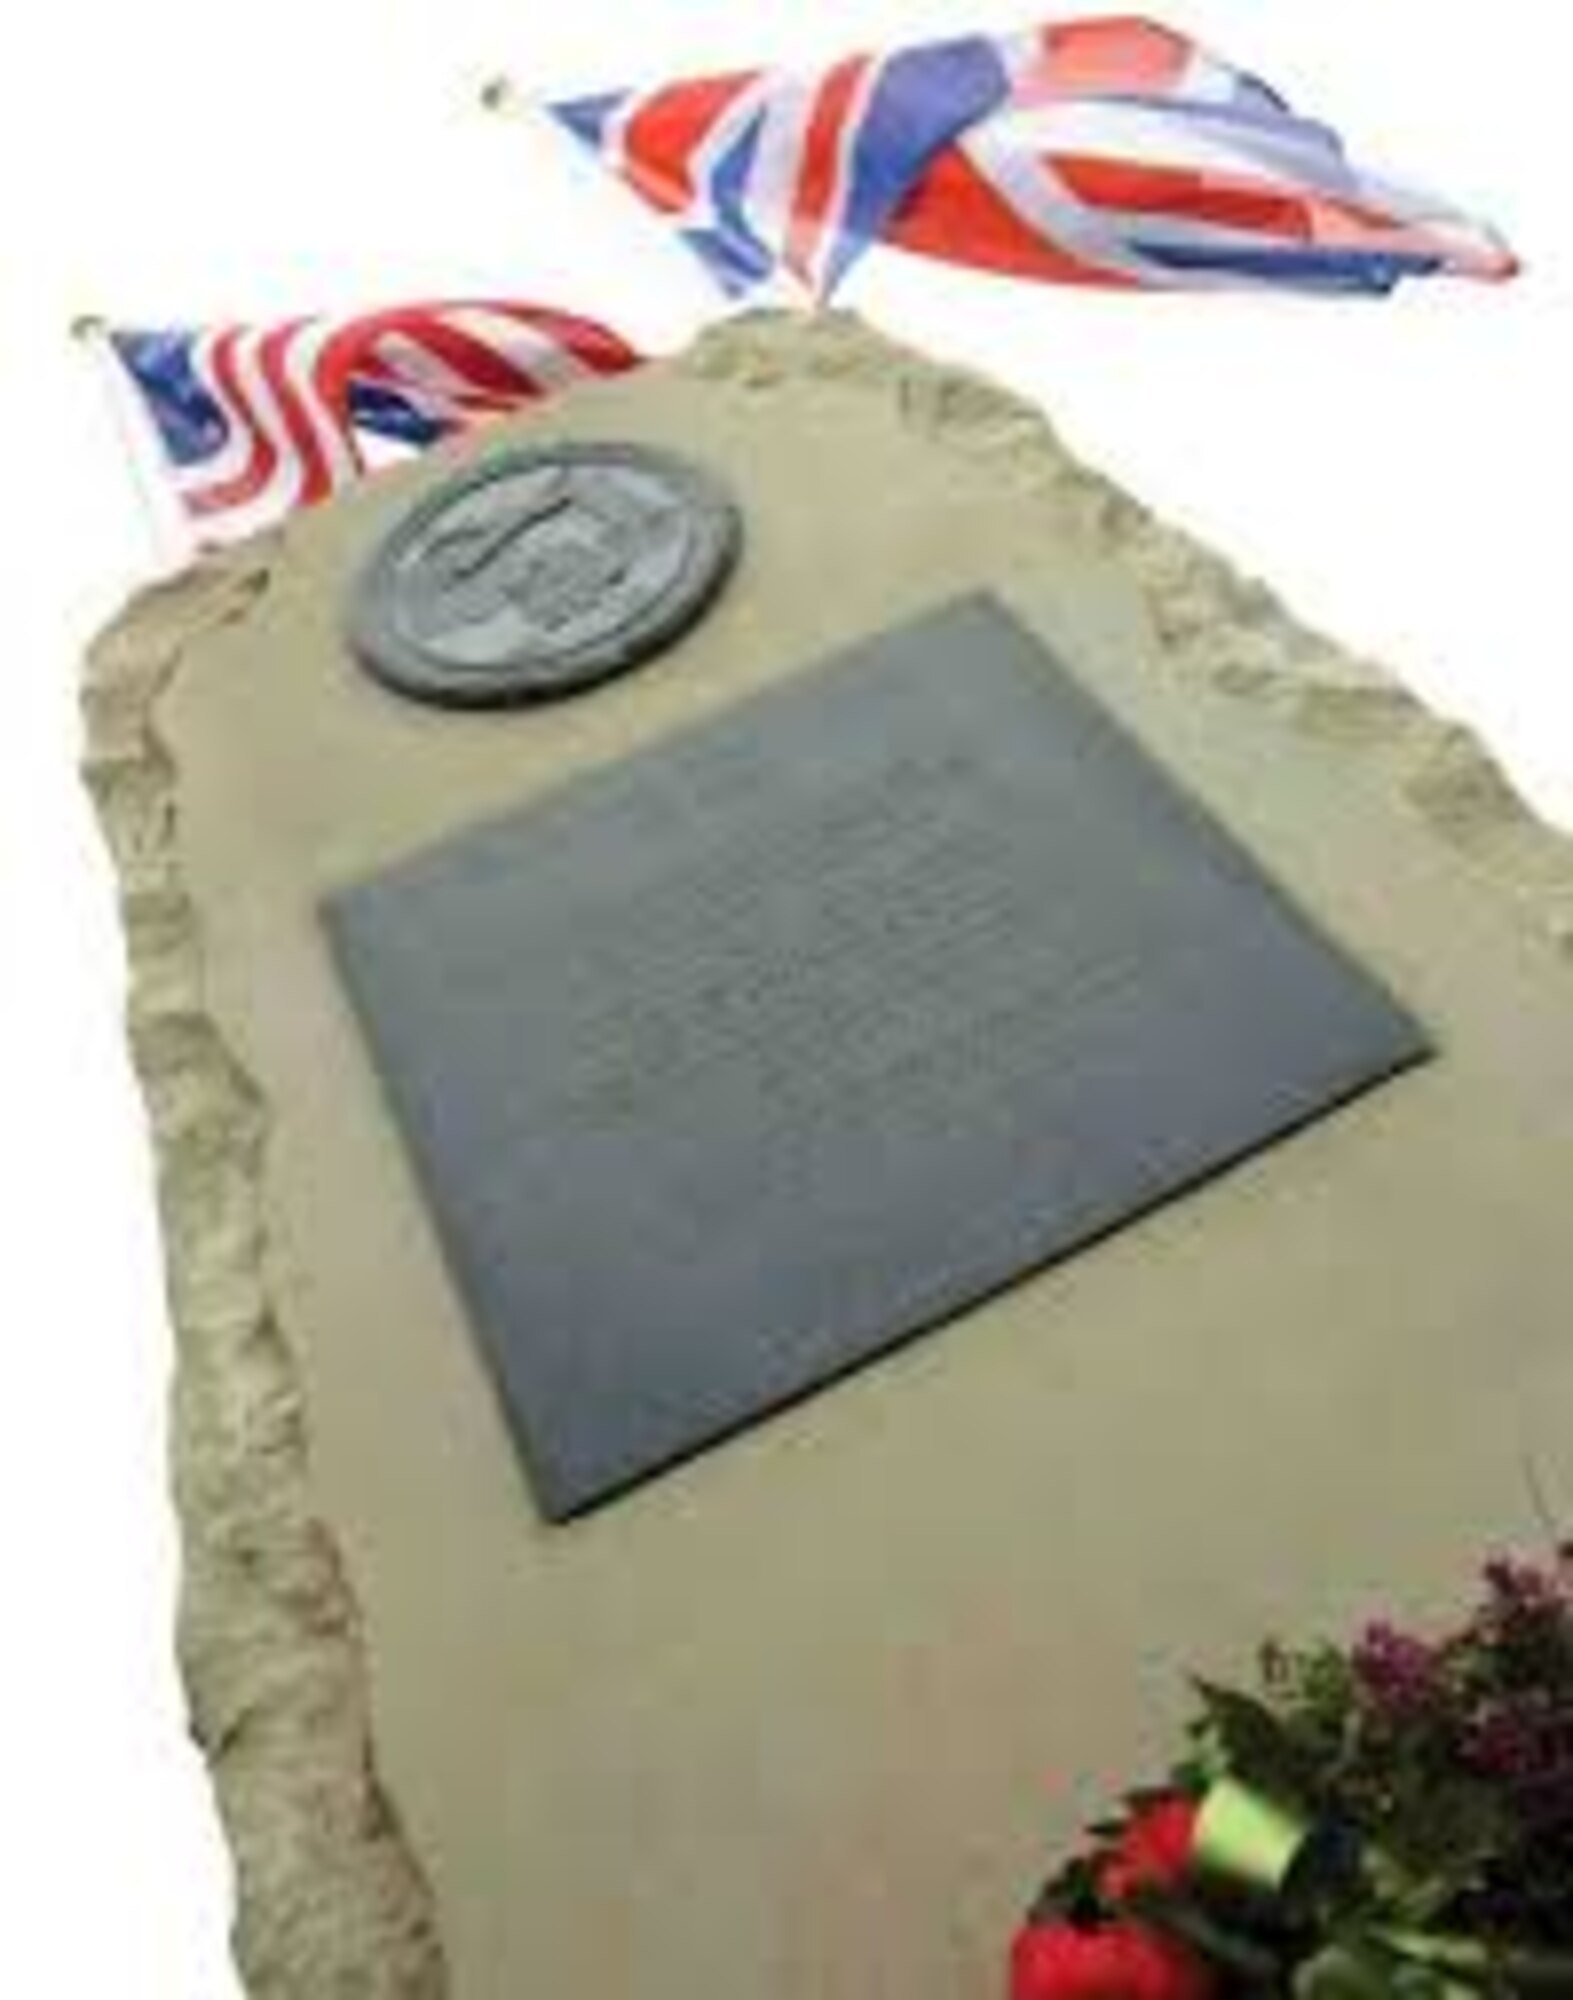 The stone memorial erected in honor of Capt. John Perrin July 4, 2007, Creswell, England. Perrin steered his failing aircraft away from the populated areas of Stafford and Creswell, England, resulting in the loss of his life. (Photo courtesy of the Creswell Parish Council)